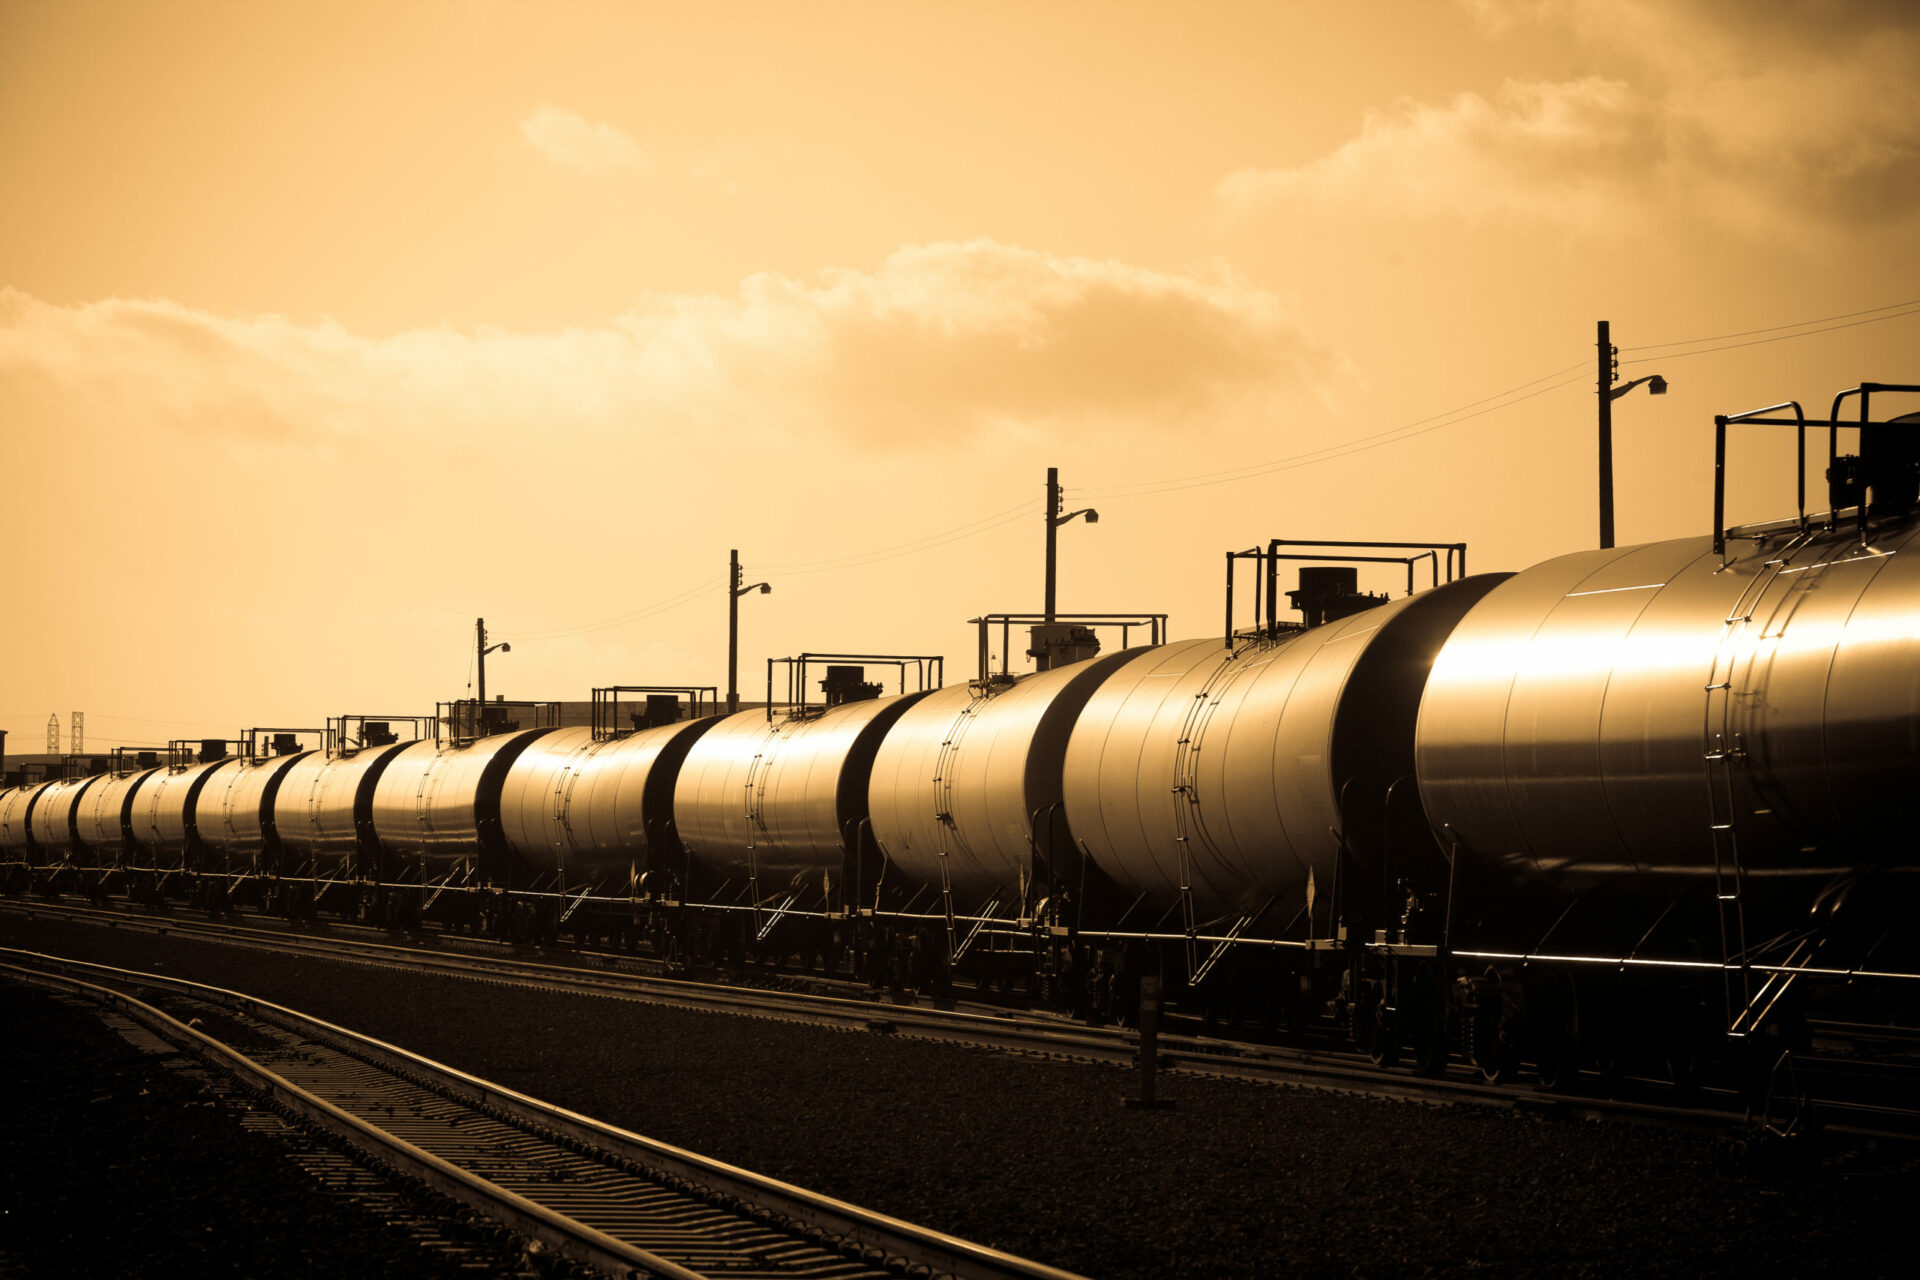 Is transporting LNG by train safe?